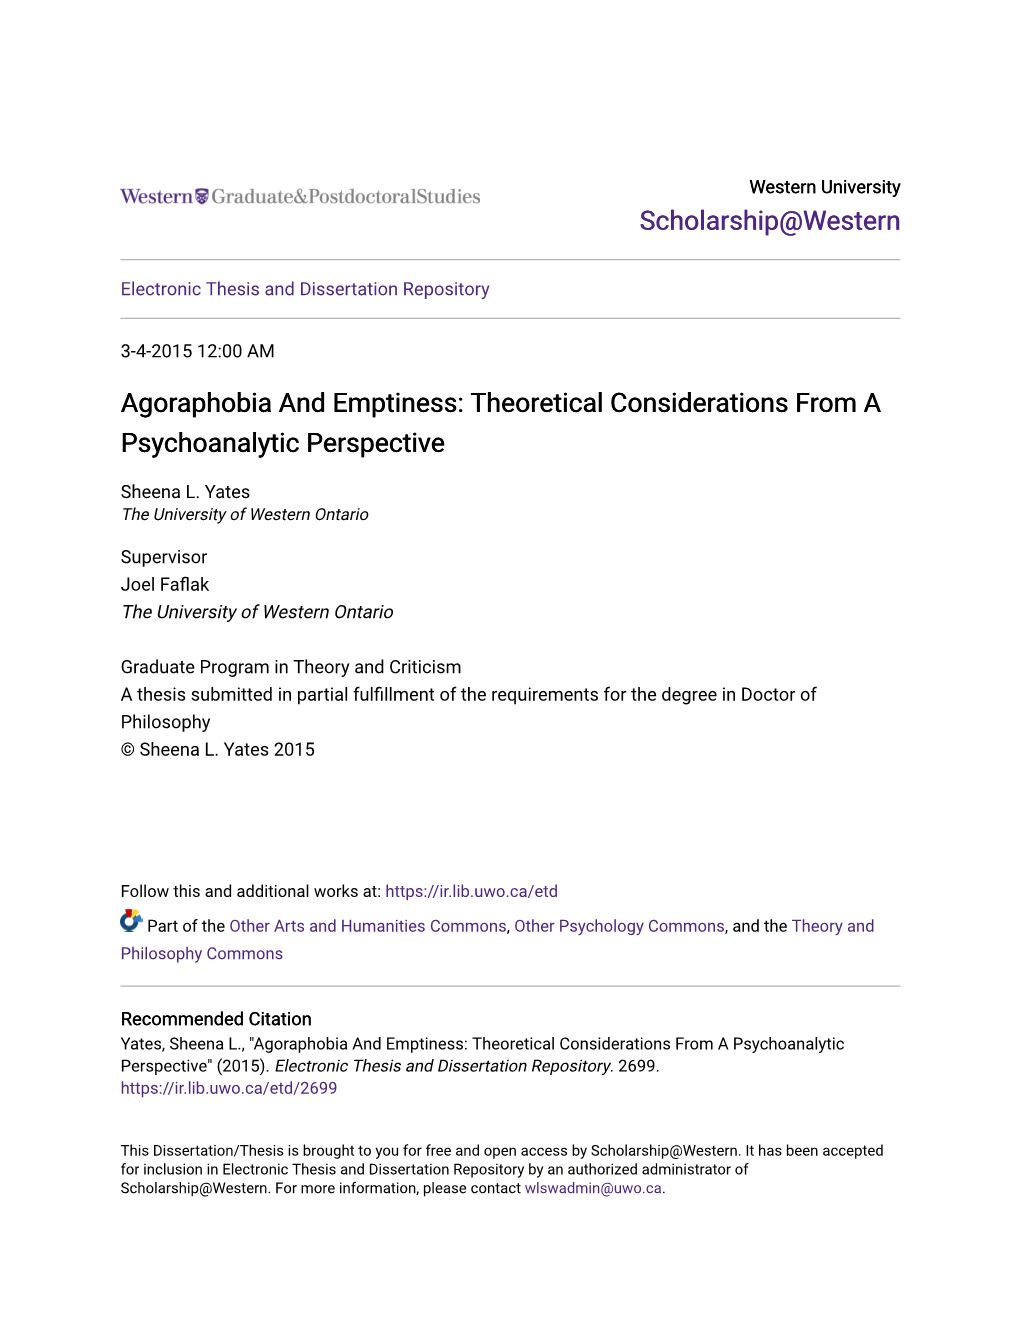 Agoraphobia and Emptiness: Theoretical Considerations from a Psychoanalytic Perspective